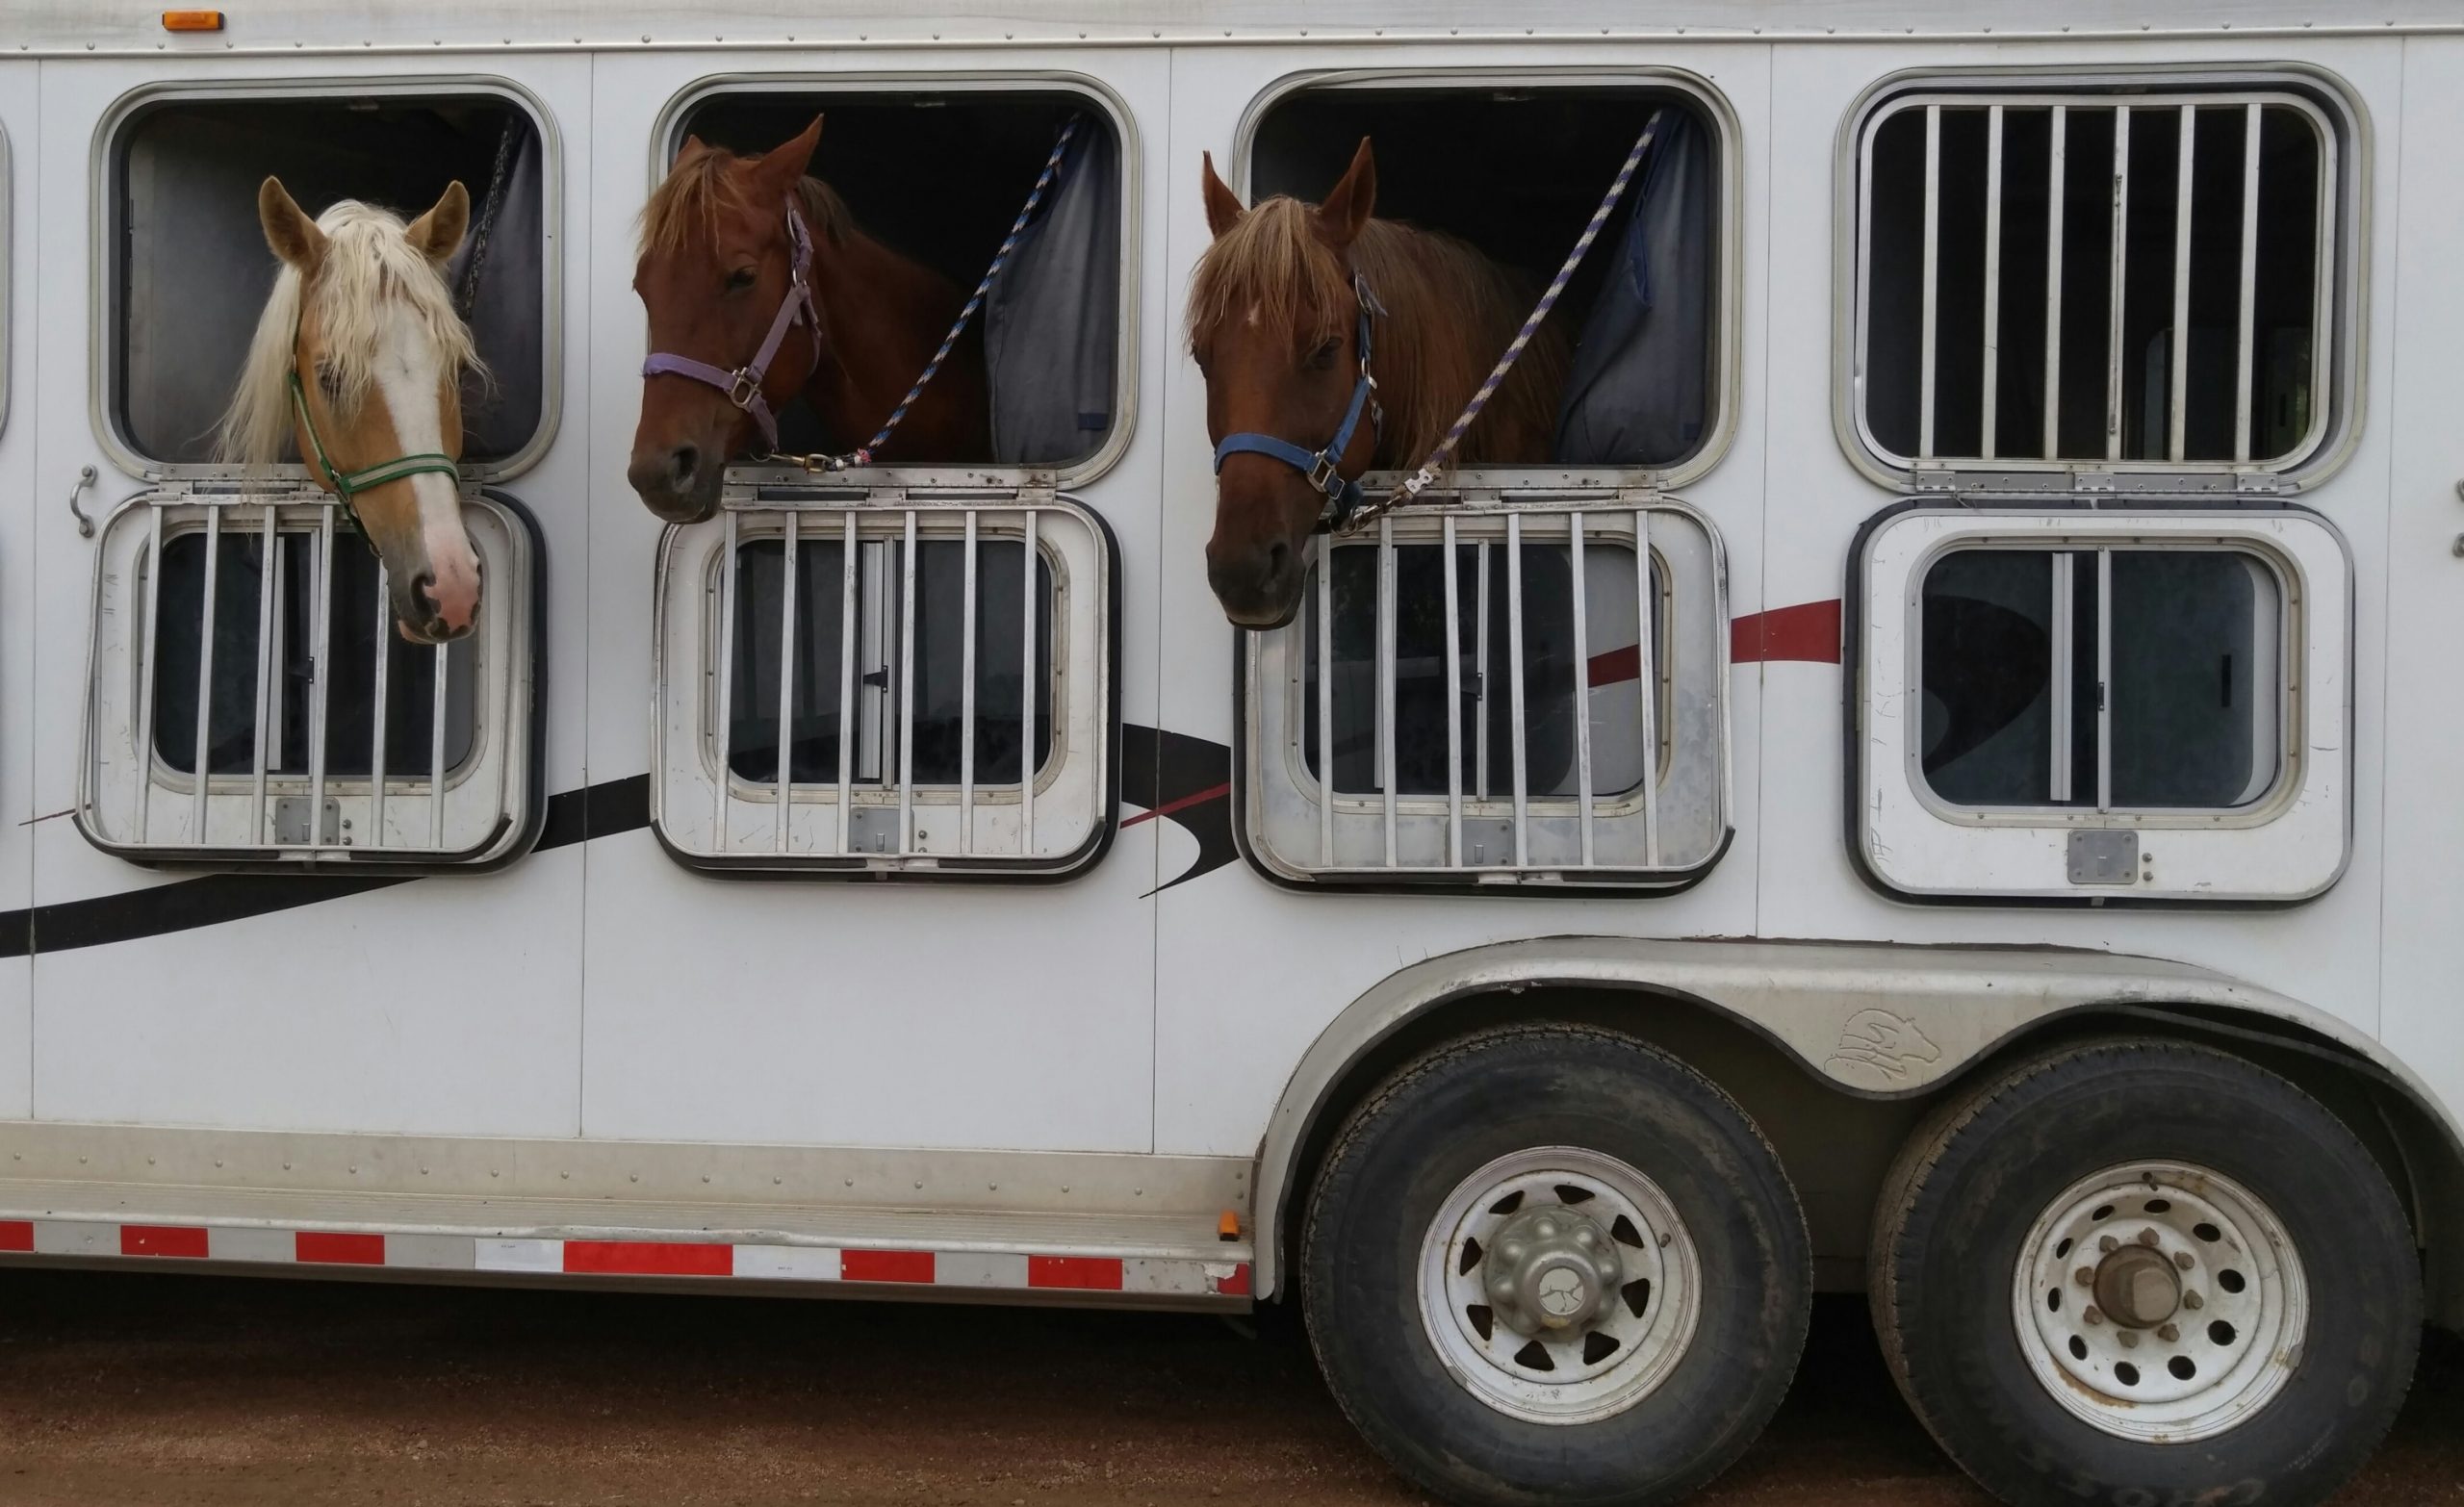 Horse shows loaded up on a trailer, ready to be shipped.